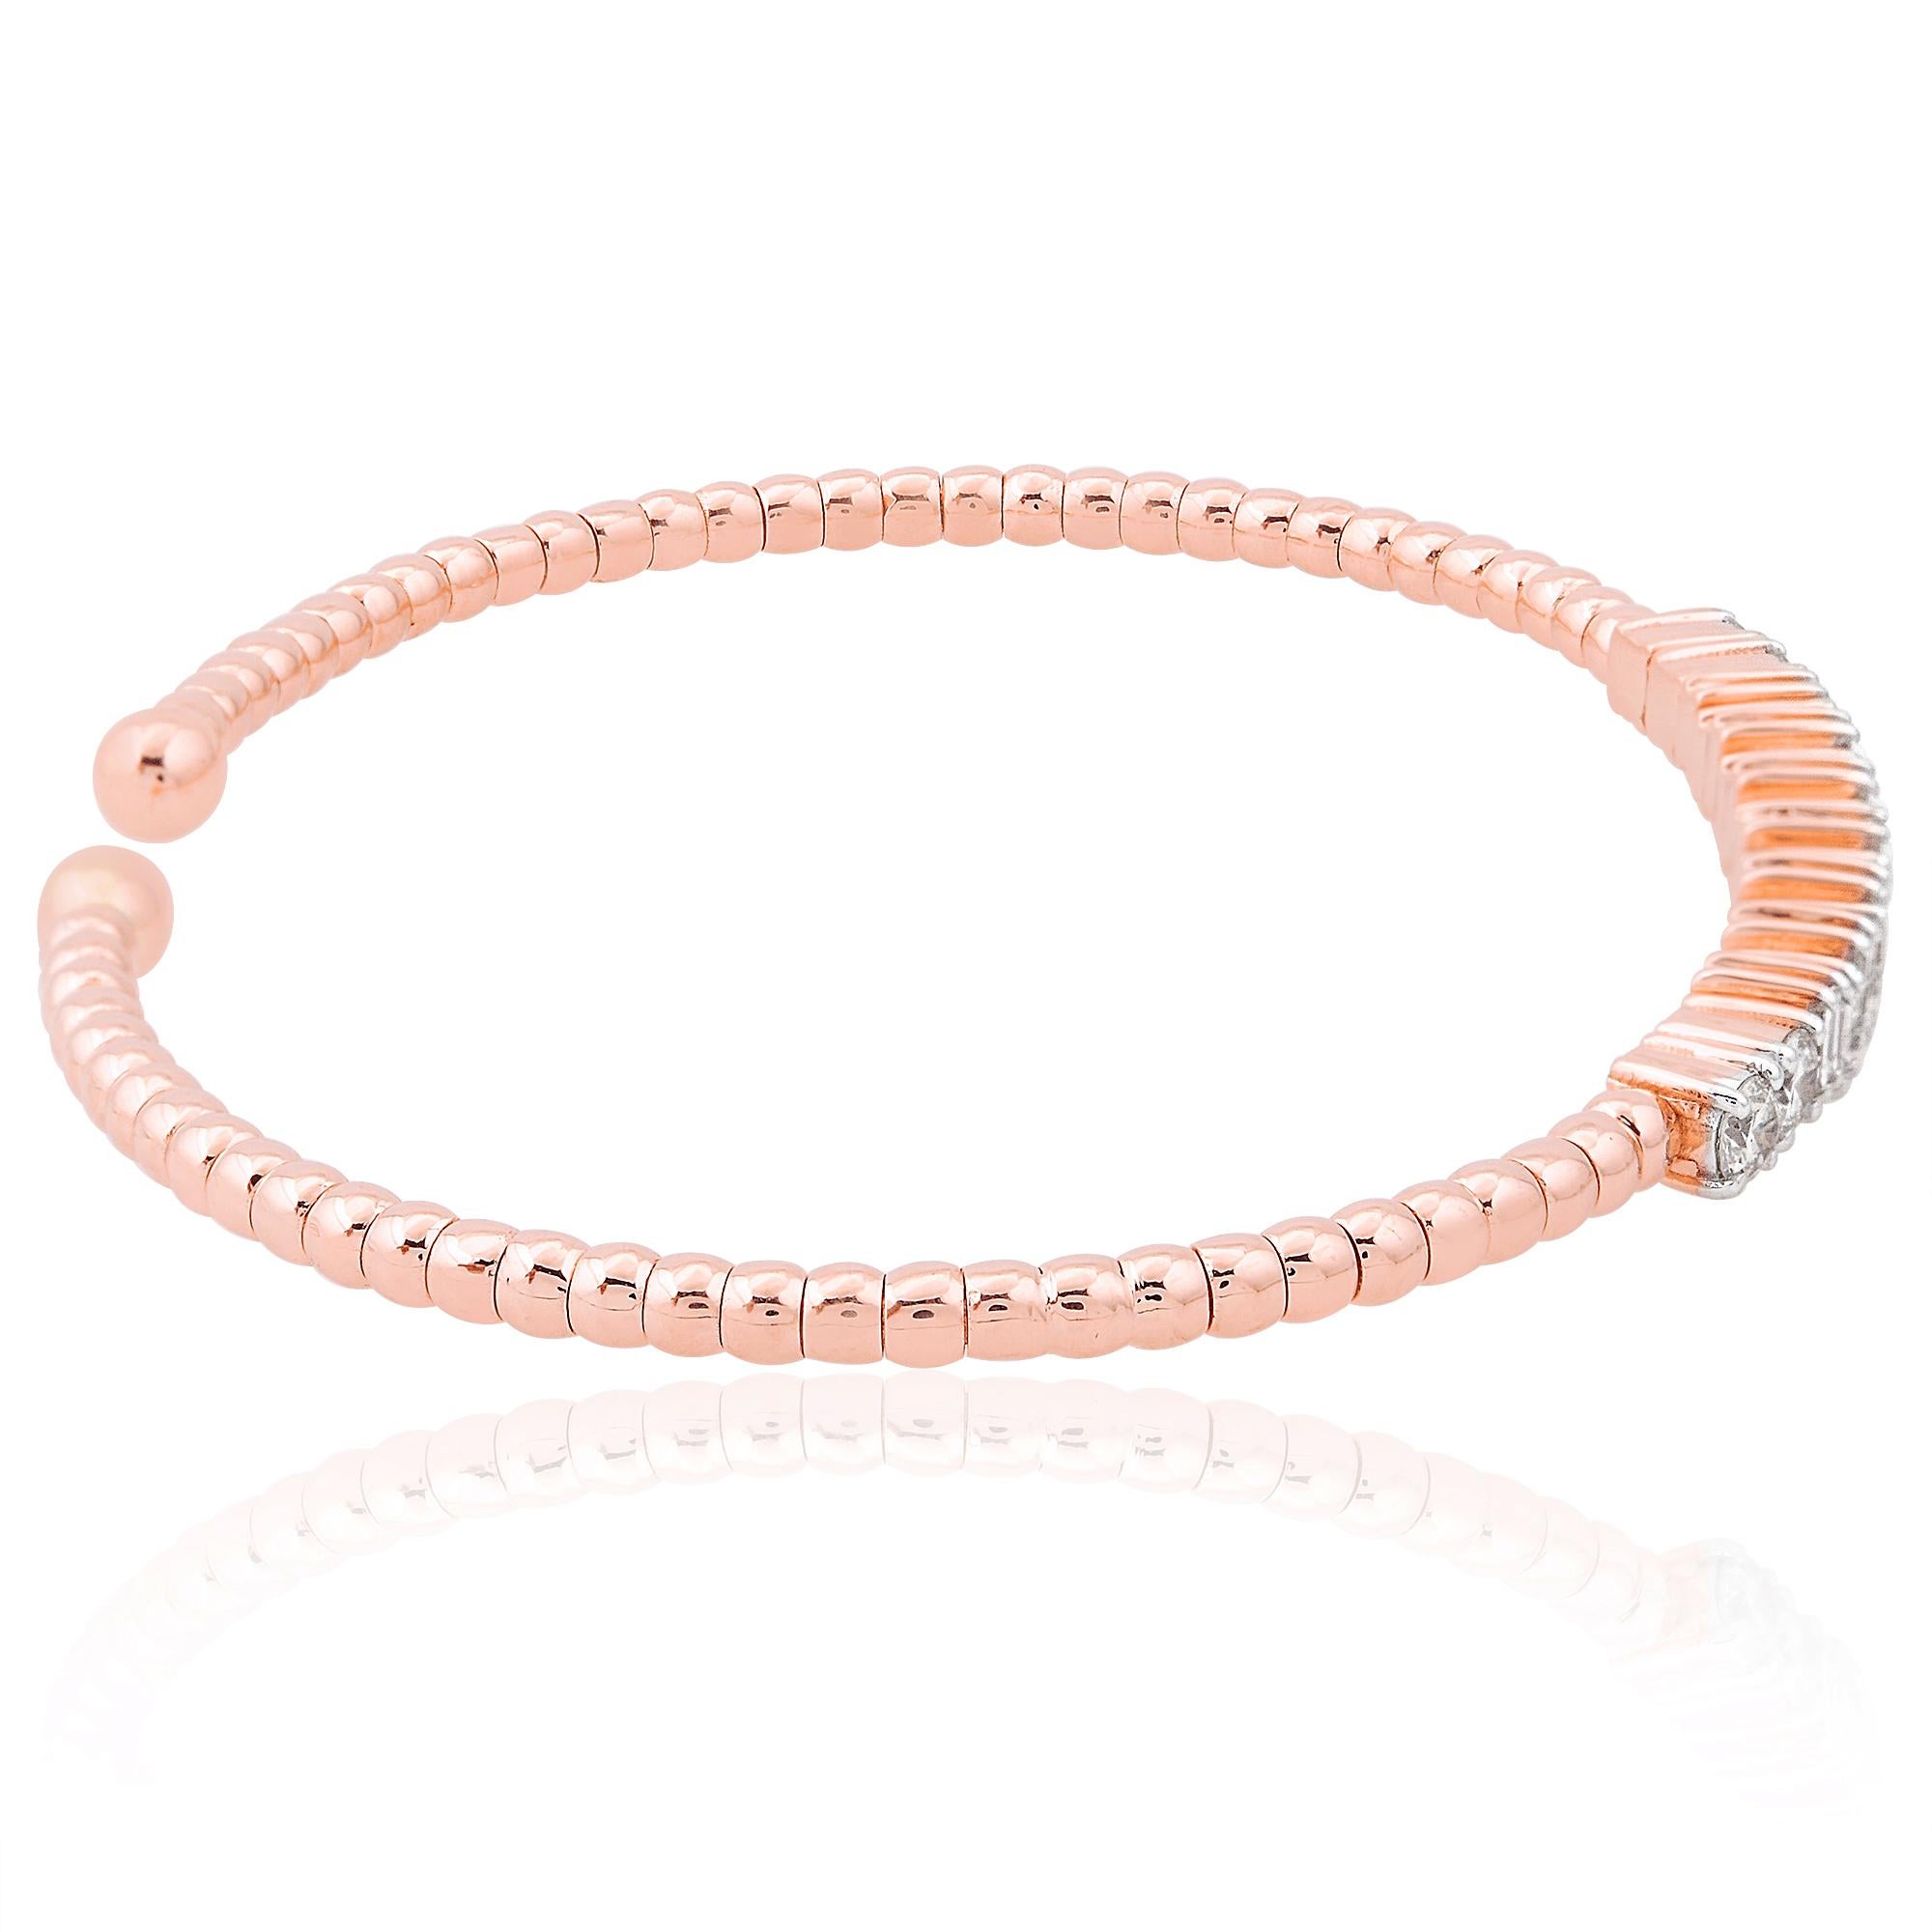 The sleek and sophisticated cuff design adds a modern twist to this timeless piece, ensuring it stands out as a statement of elegance and style. Crafted with precision and attention to detail, the 14 Karat Rose Gold setting complements the diamonds